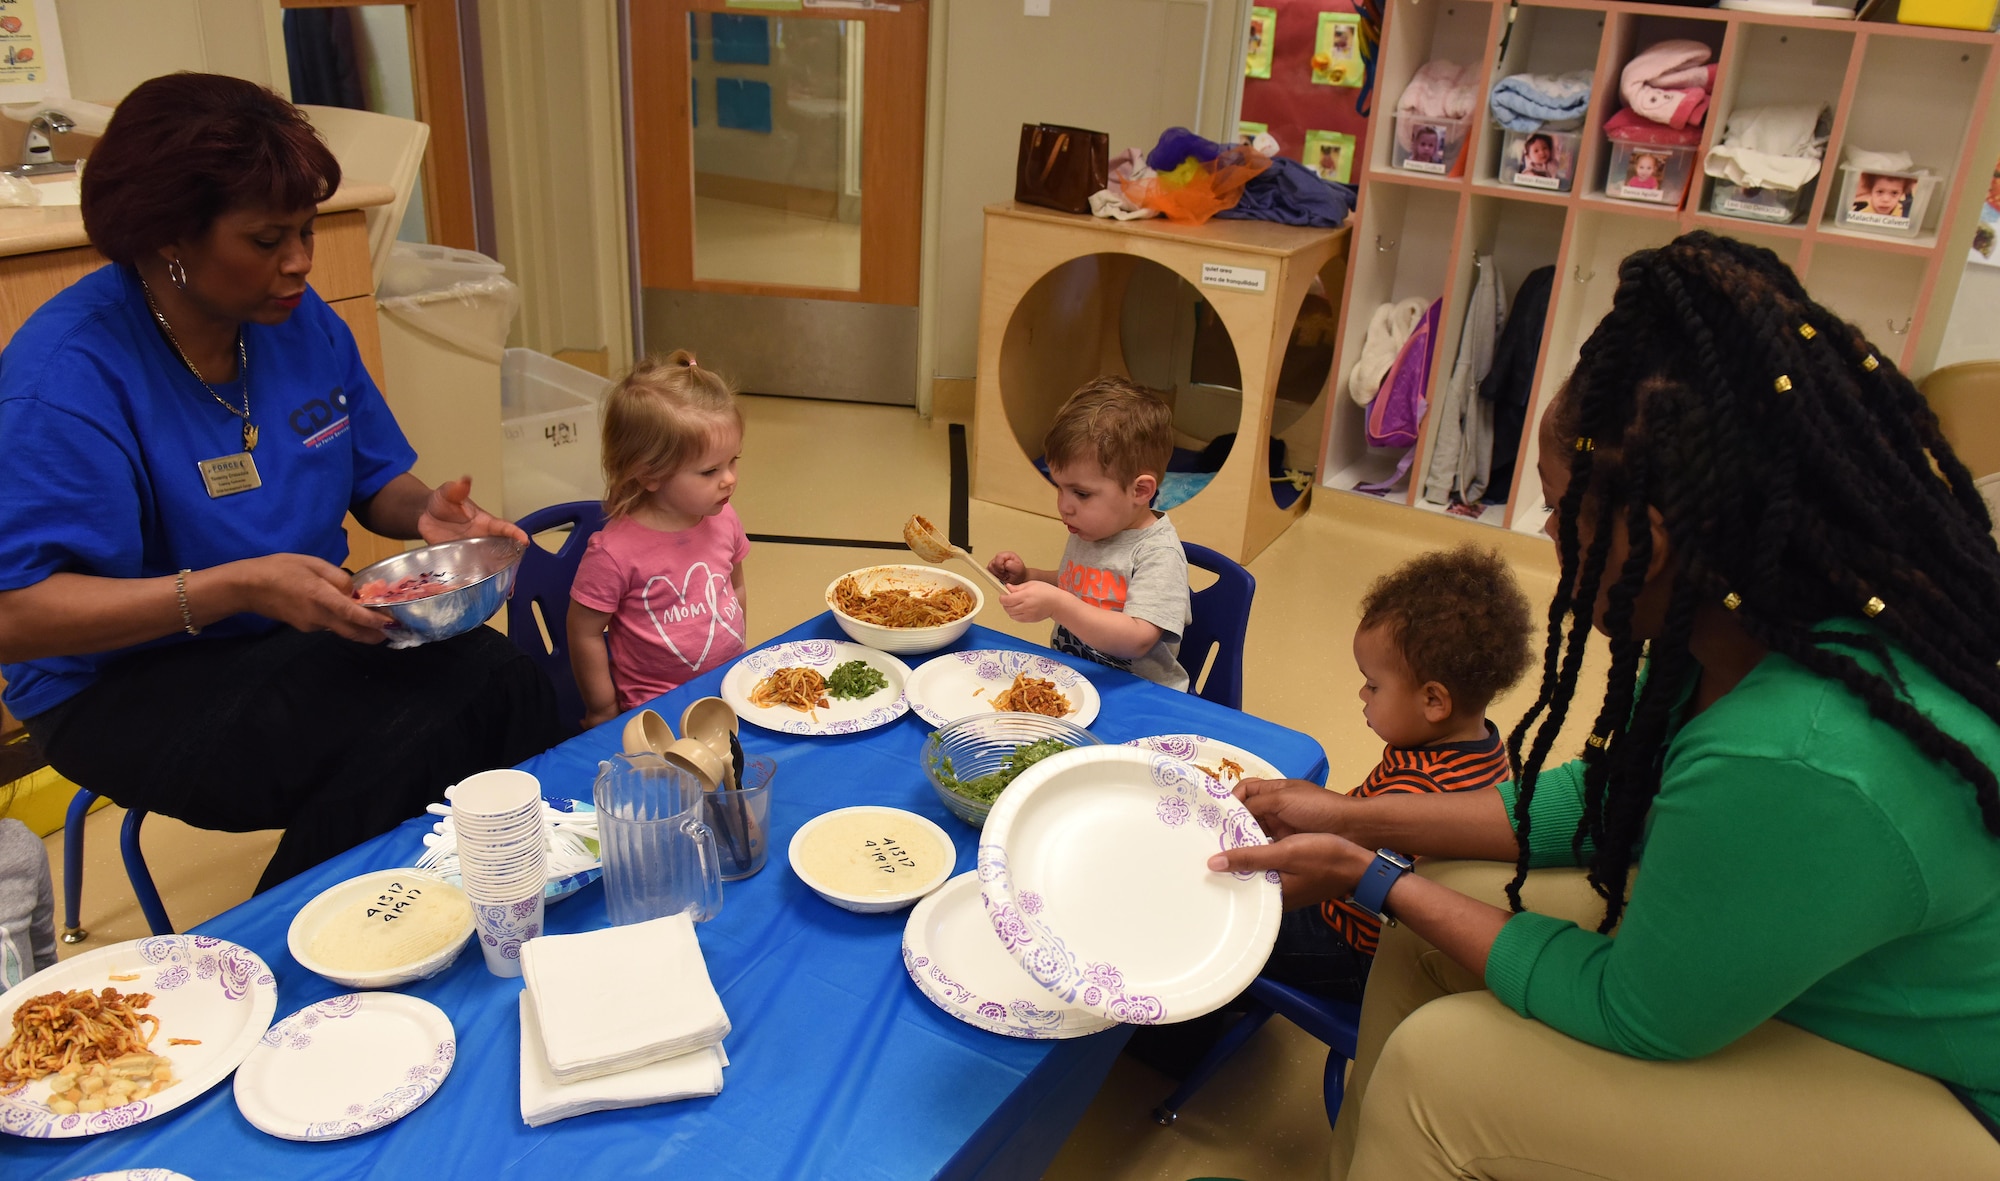 Two 9th Force Support Squadron child development center staff help care for a group of children during a spaghetti luncheon April 14, 2017, at Beale Air Force Base, California. When a recent hiring freeze came down, Beale’s CDC experienced some staffing issues, but they were still able to provide child care with creative problem solving and help from their leadership. (U.S. Air Force photo/Chandresh Bhakta)